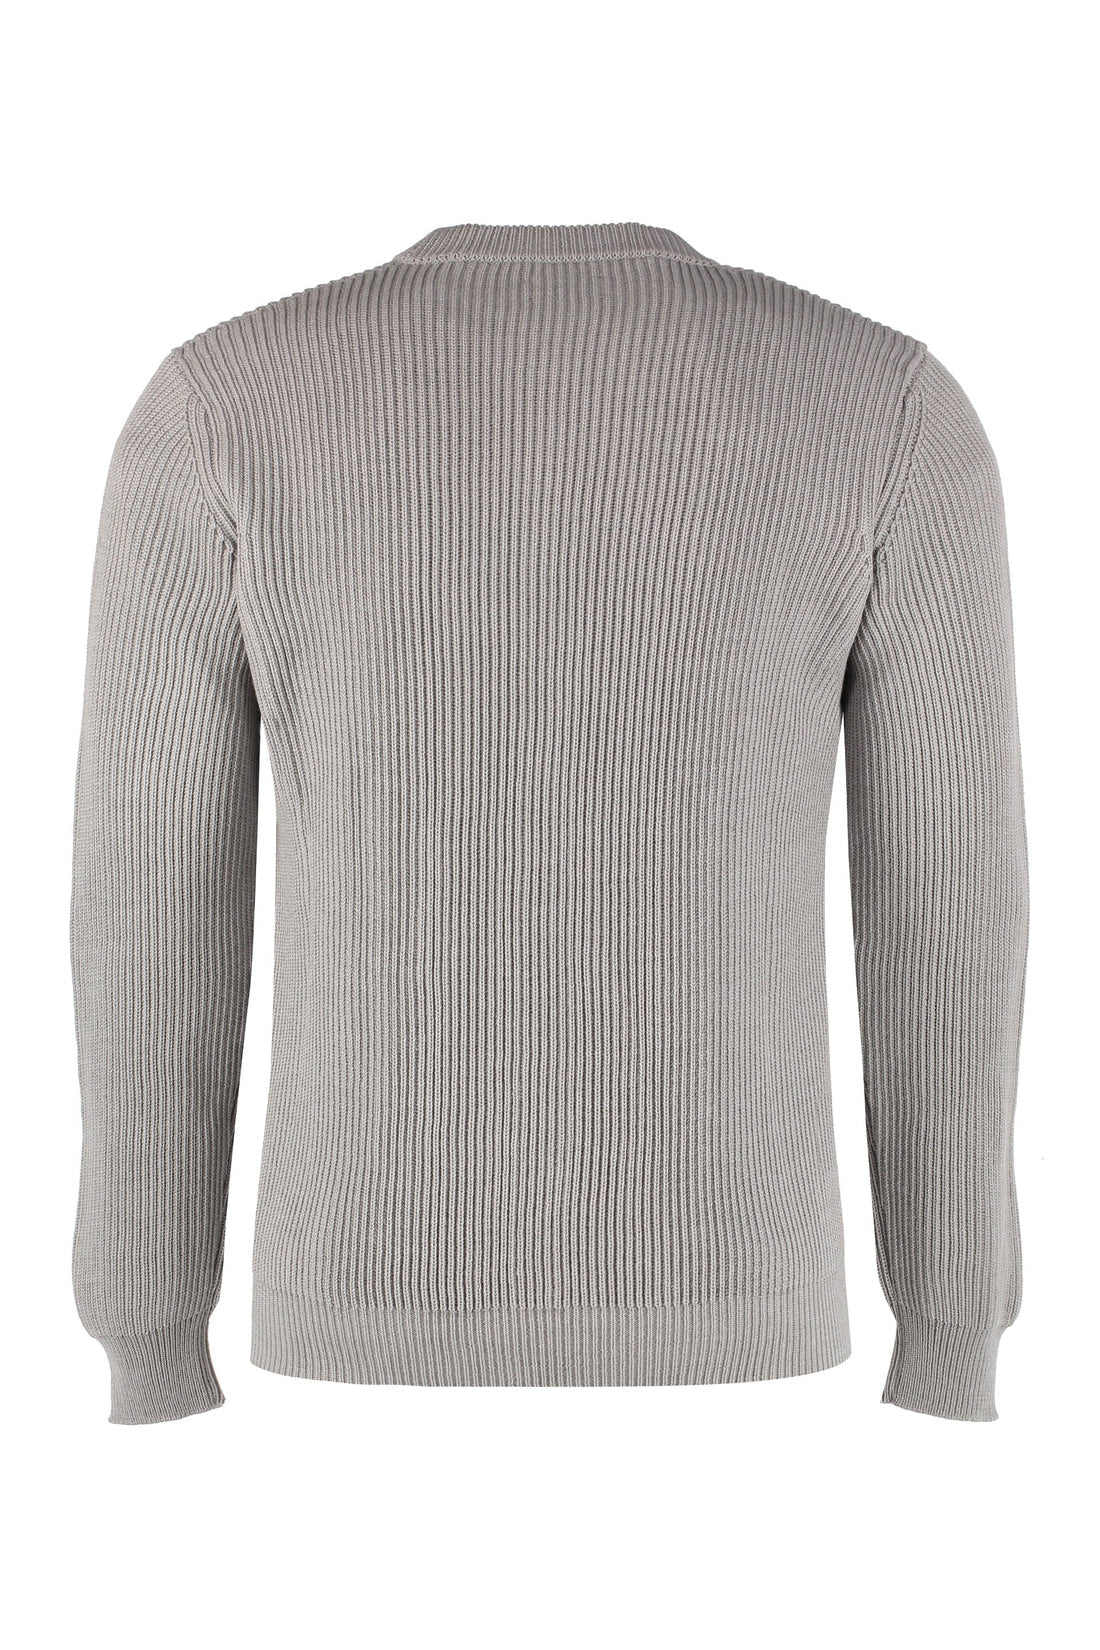 Roberto Collina-OUTLET-SALE-Wool sweater-ARCHIVIST